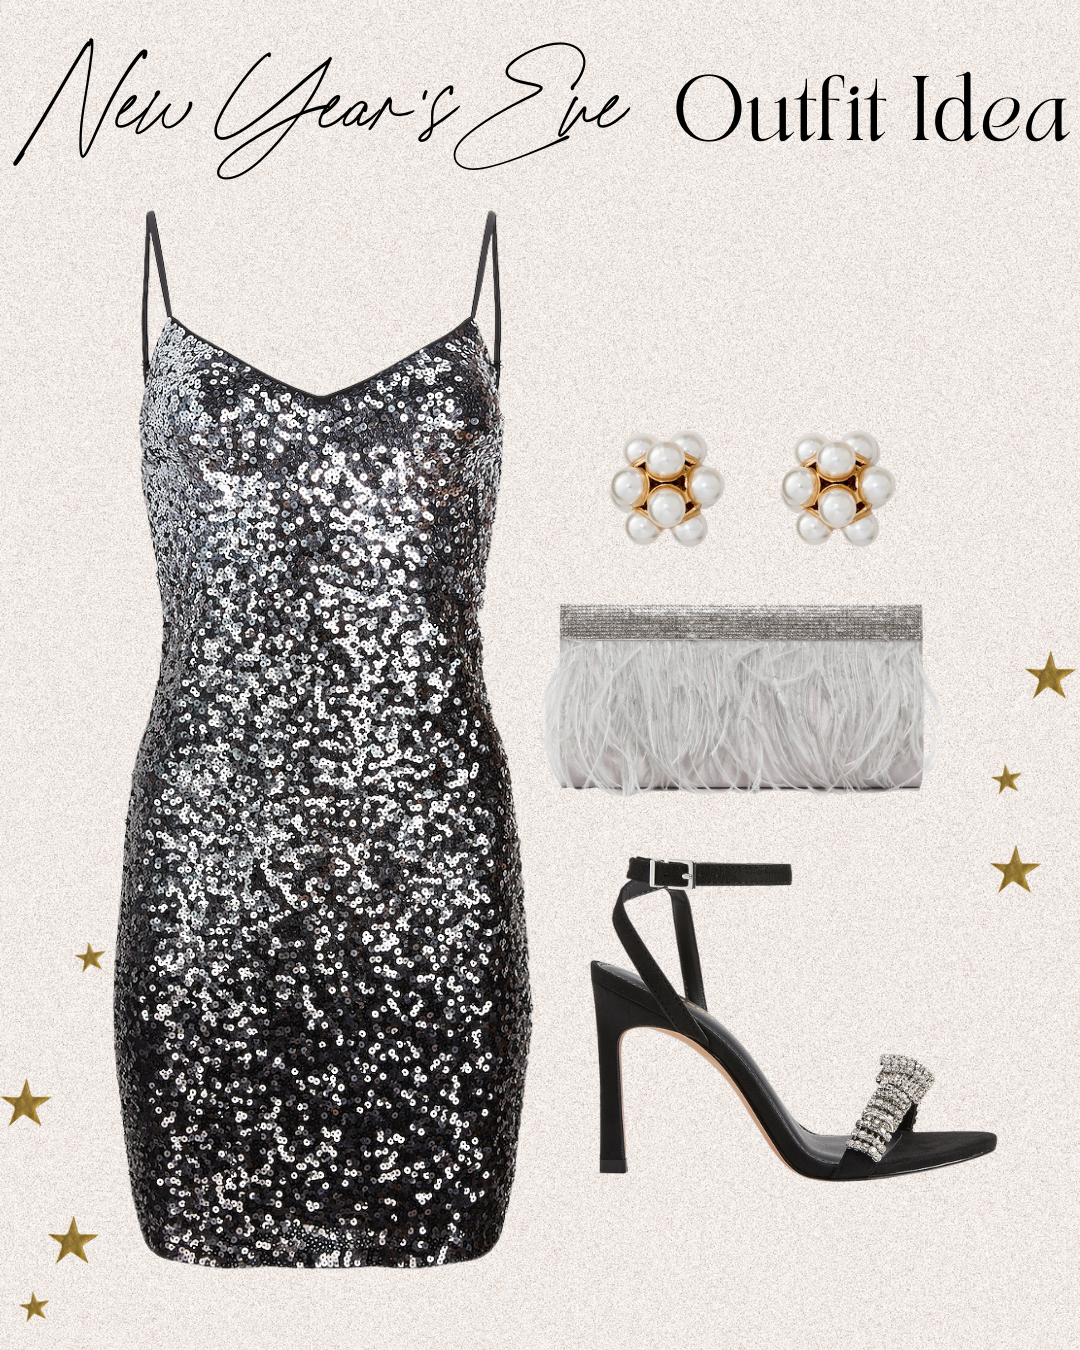 New Years Eve Outfit Ideas 2021. Unique New Years Eve Dresses. What to Wear for a New Years Eve Party.